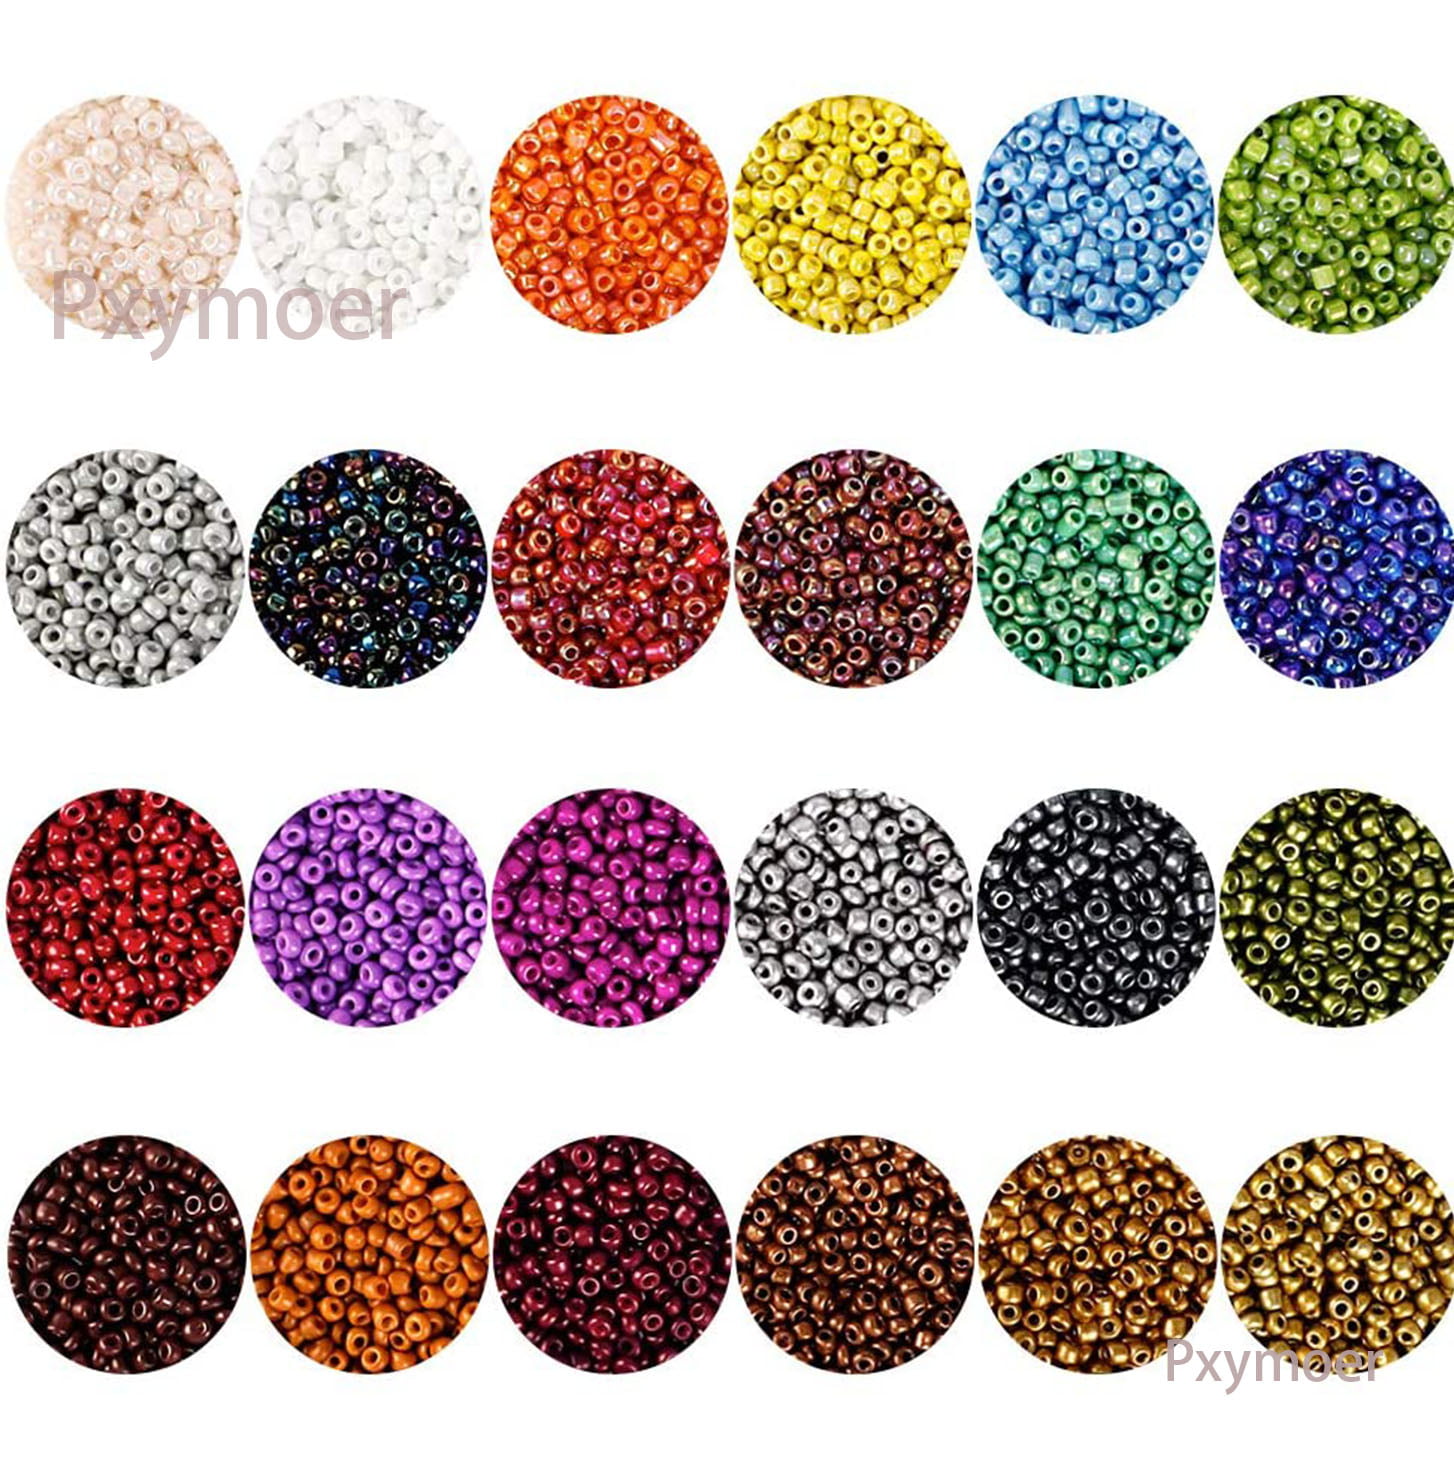 OLIKER 42000Pcs 2mm Glass Seed Beads for Jewelry Making Kit,72 Colors Seed Beads for Jewelry Making with Alphabet Letter Bead